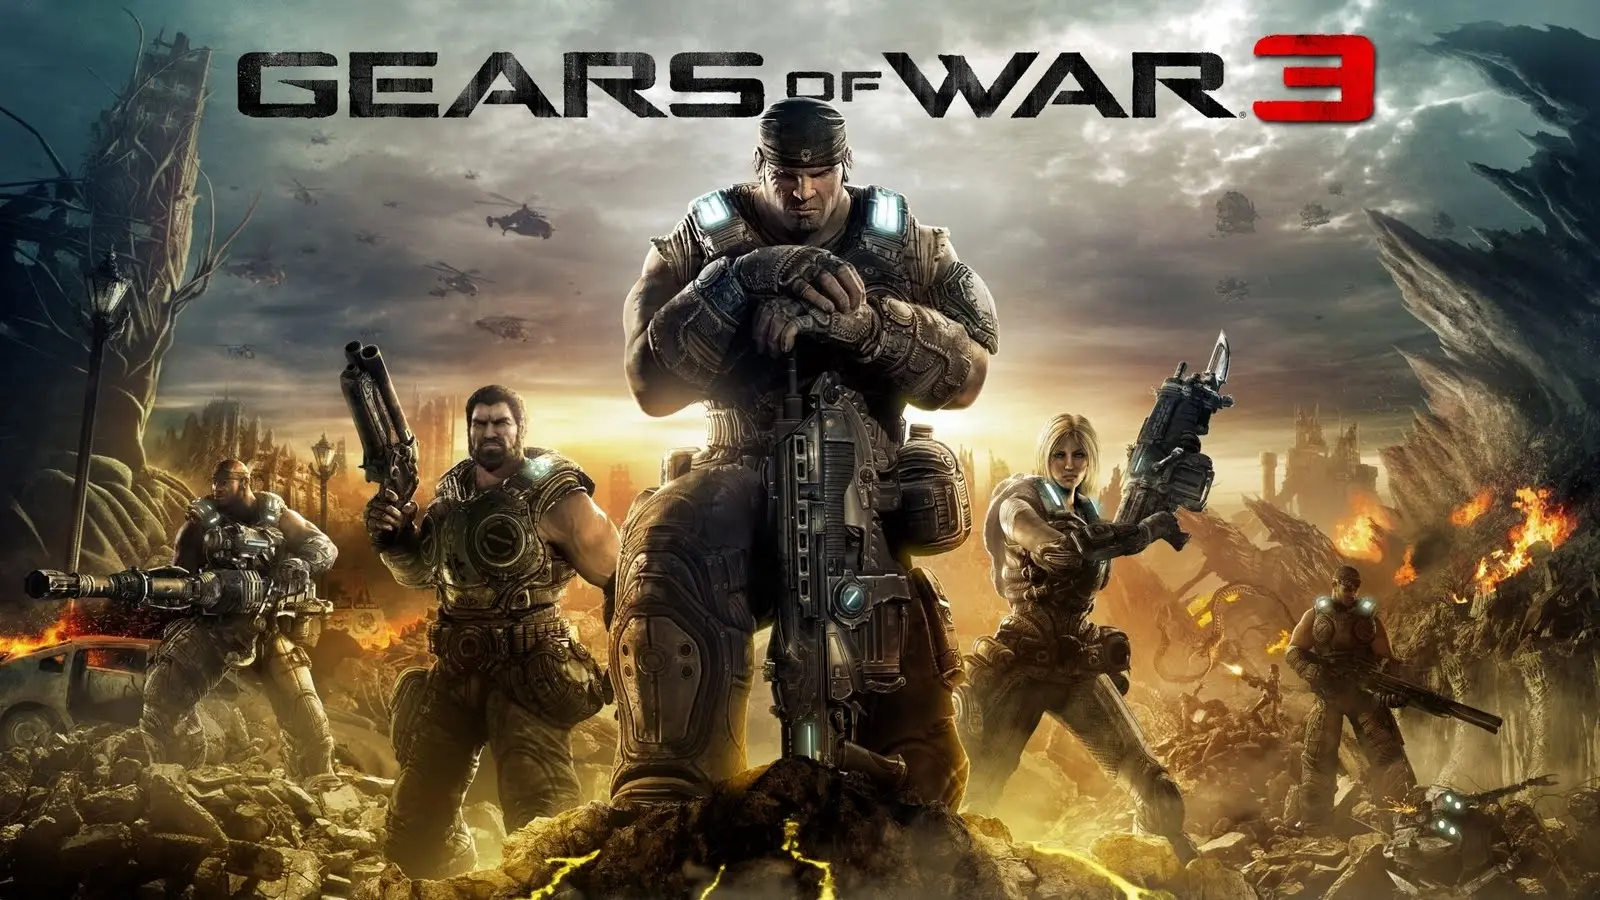 Game Gears of war 3 wallpaper 5 | Background Image